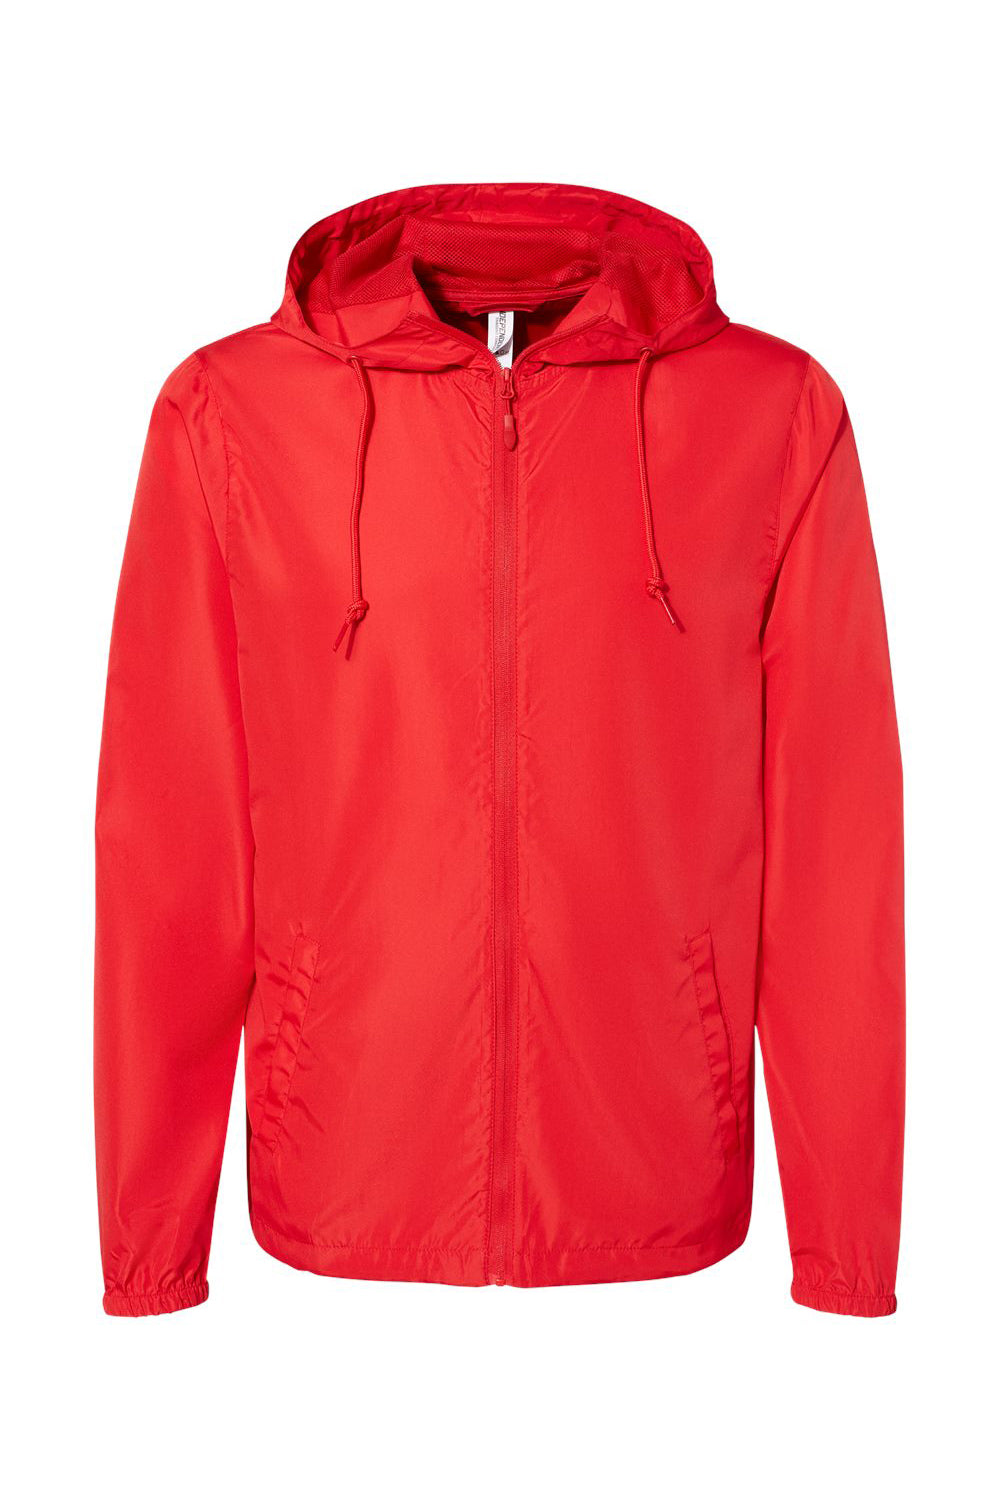 Independent Trading Co. EXP54LWZ Mens Full Zip Windbreaker Hooded Jacket Red Flat Front